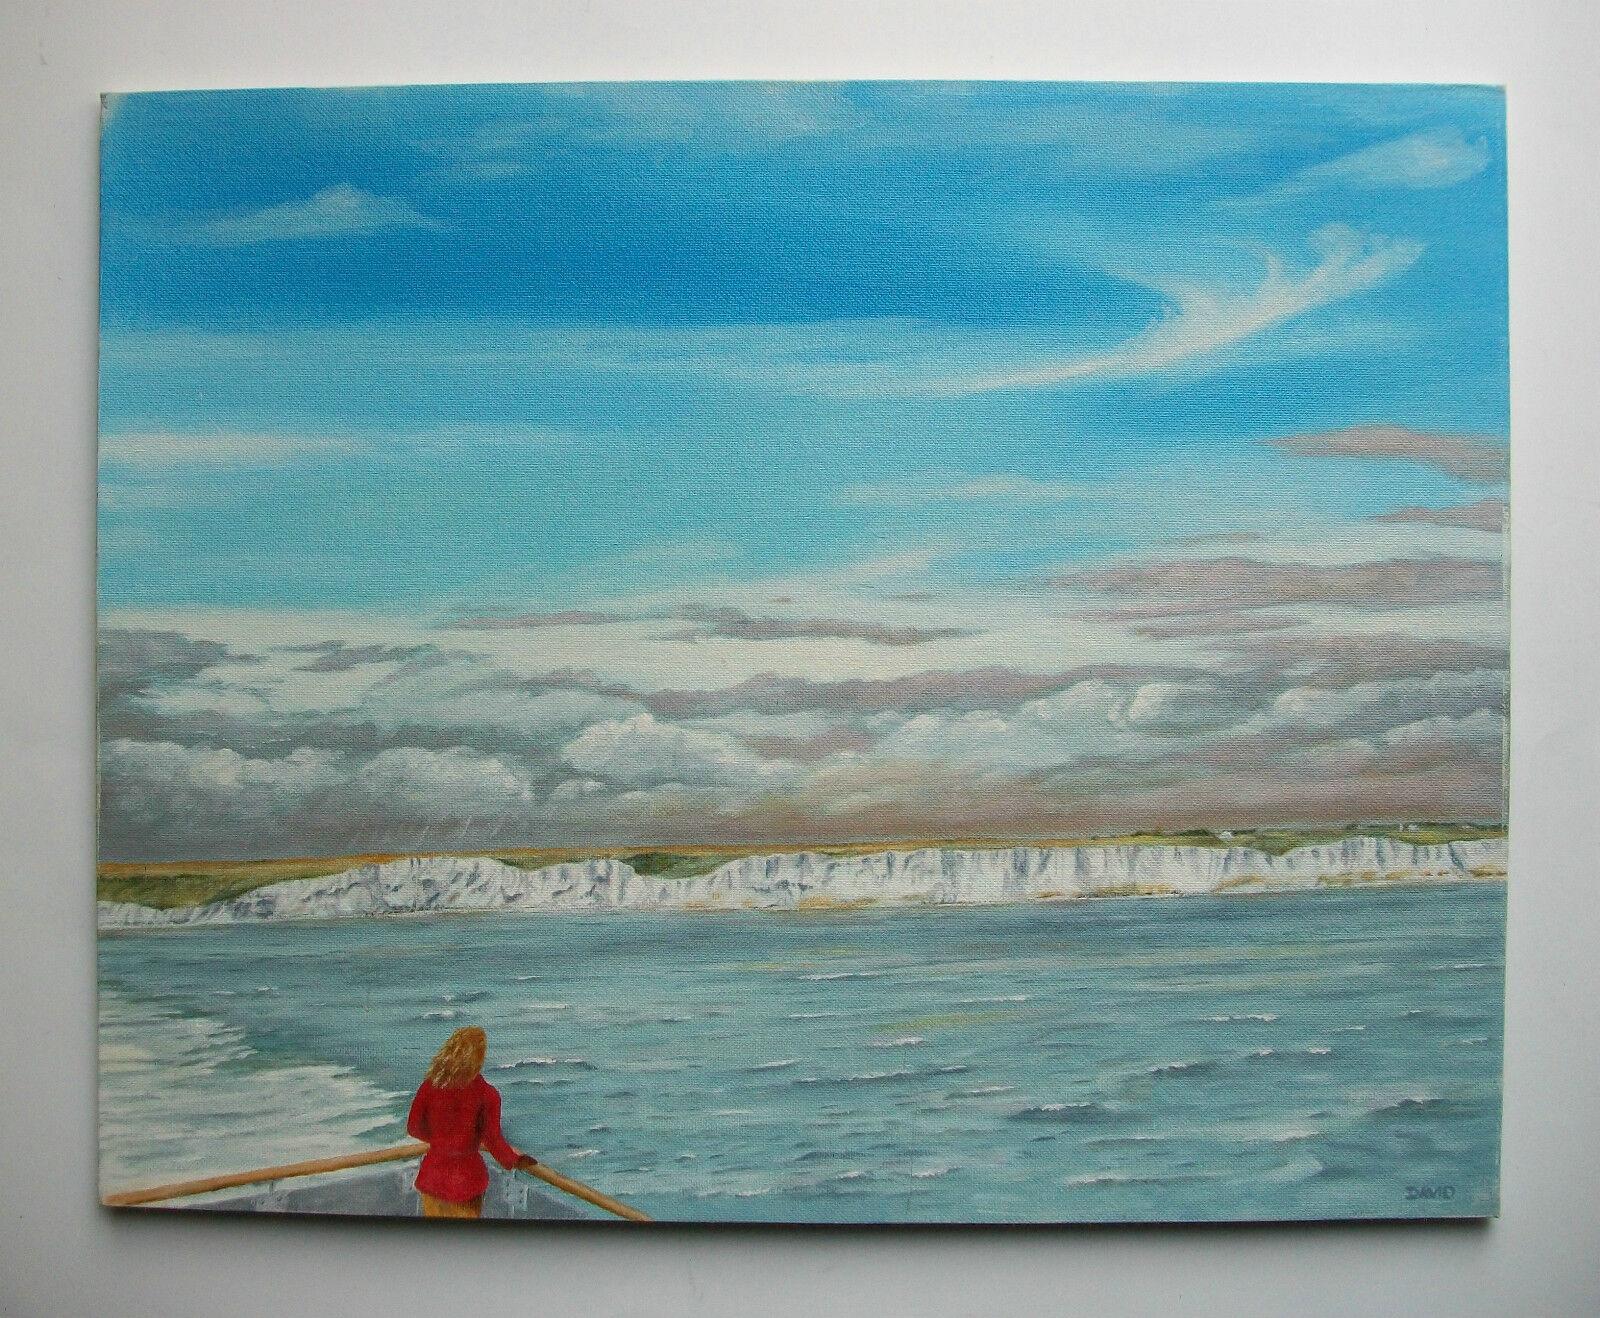 Canvas DAVID LANGDON - 'Cliffs of Dover' - Contemporary Oil Painting - Signed - C. 2000 For Sale